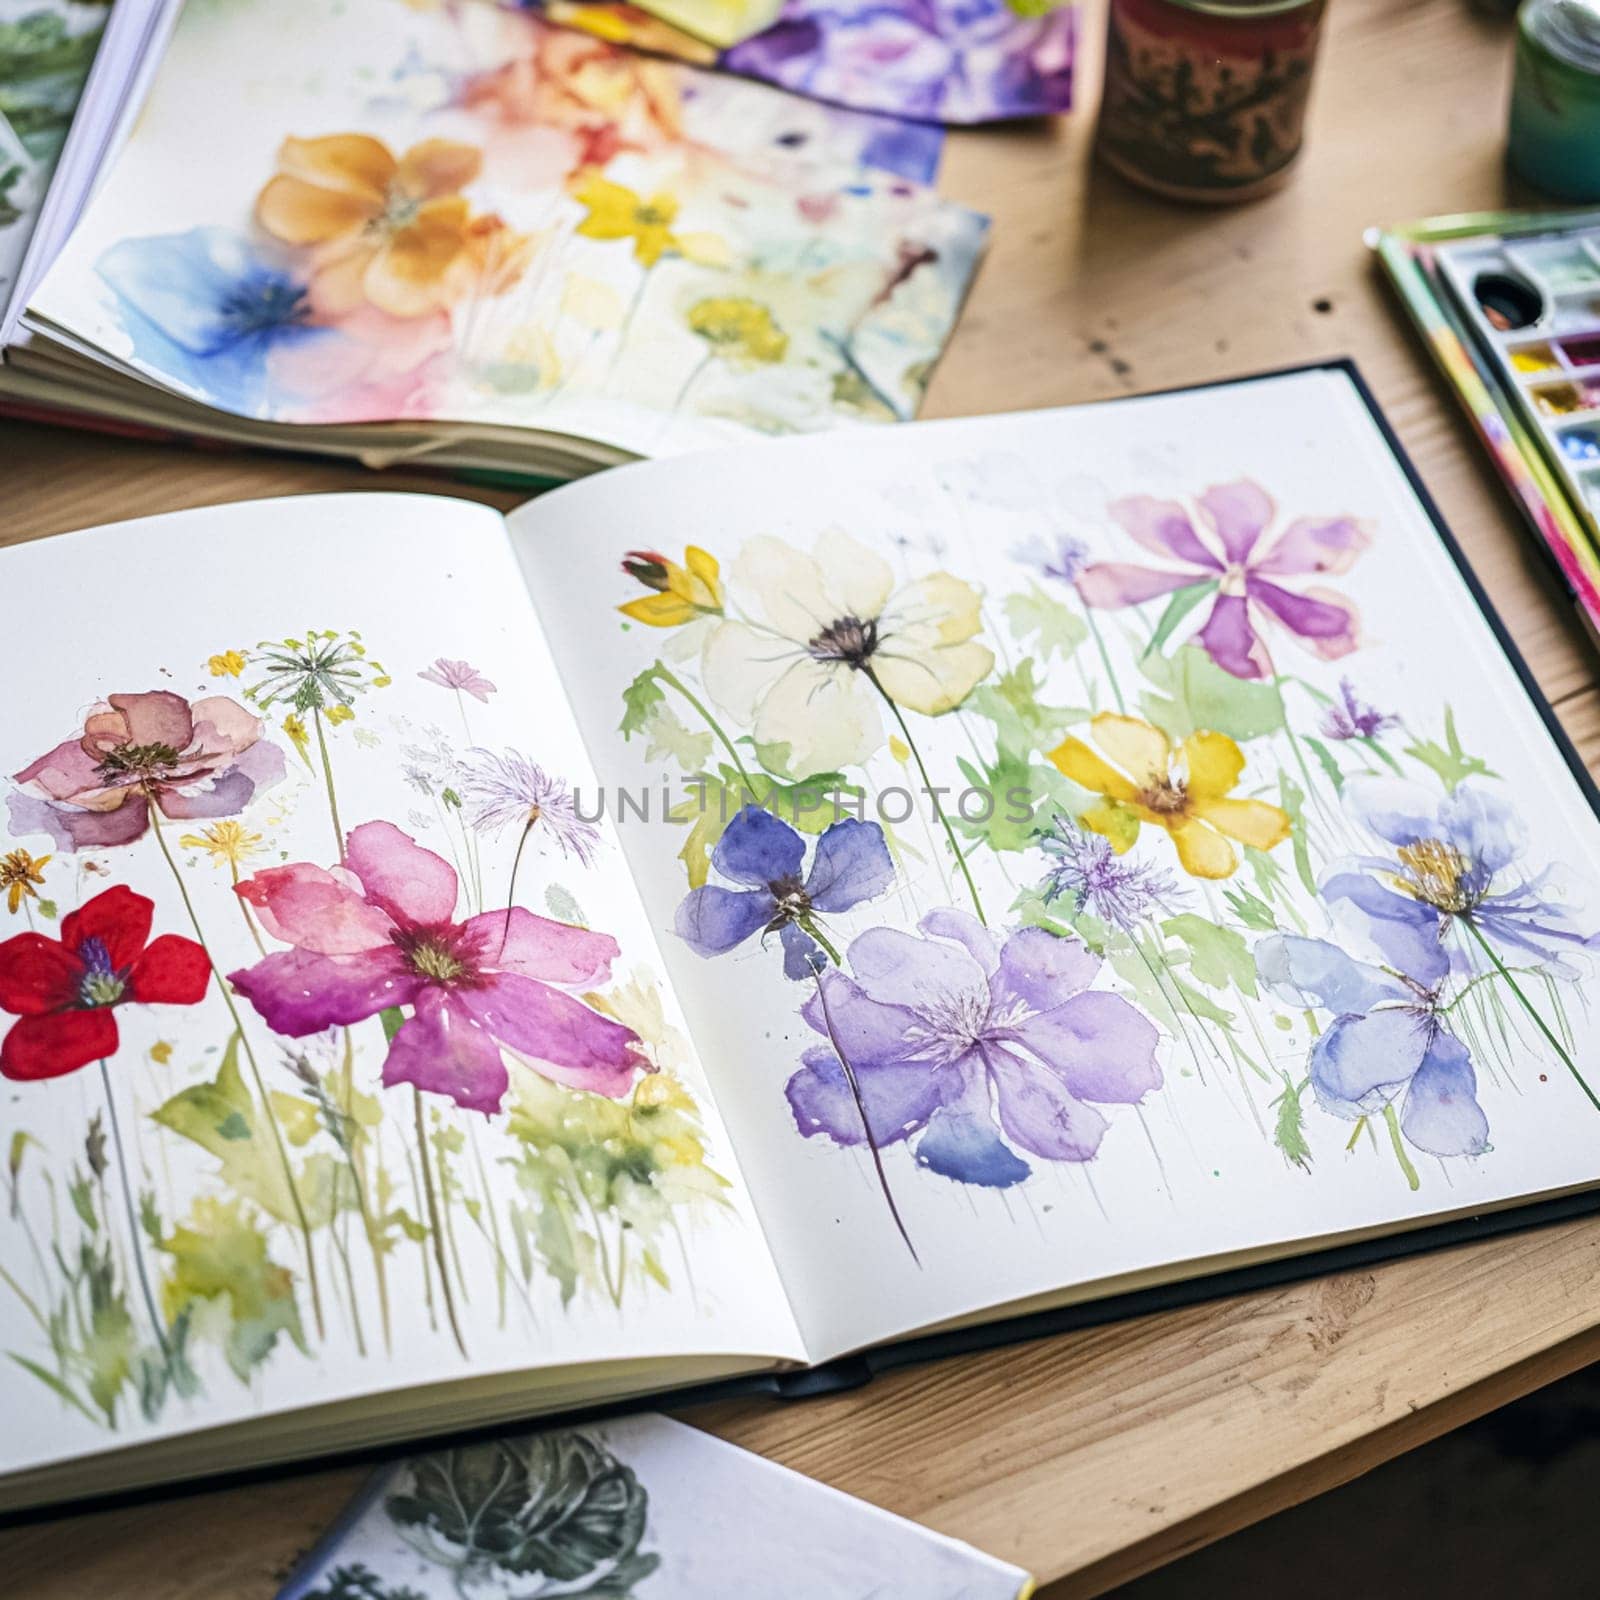 Watercolour painting of wildflowers in a sketchbook, surrounded by an array of watercolour paints and brushes on a wooden table, hobby and craft by Anneleven